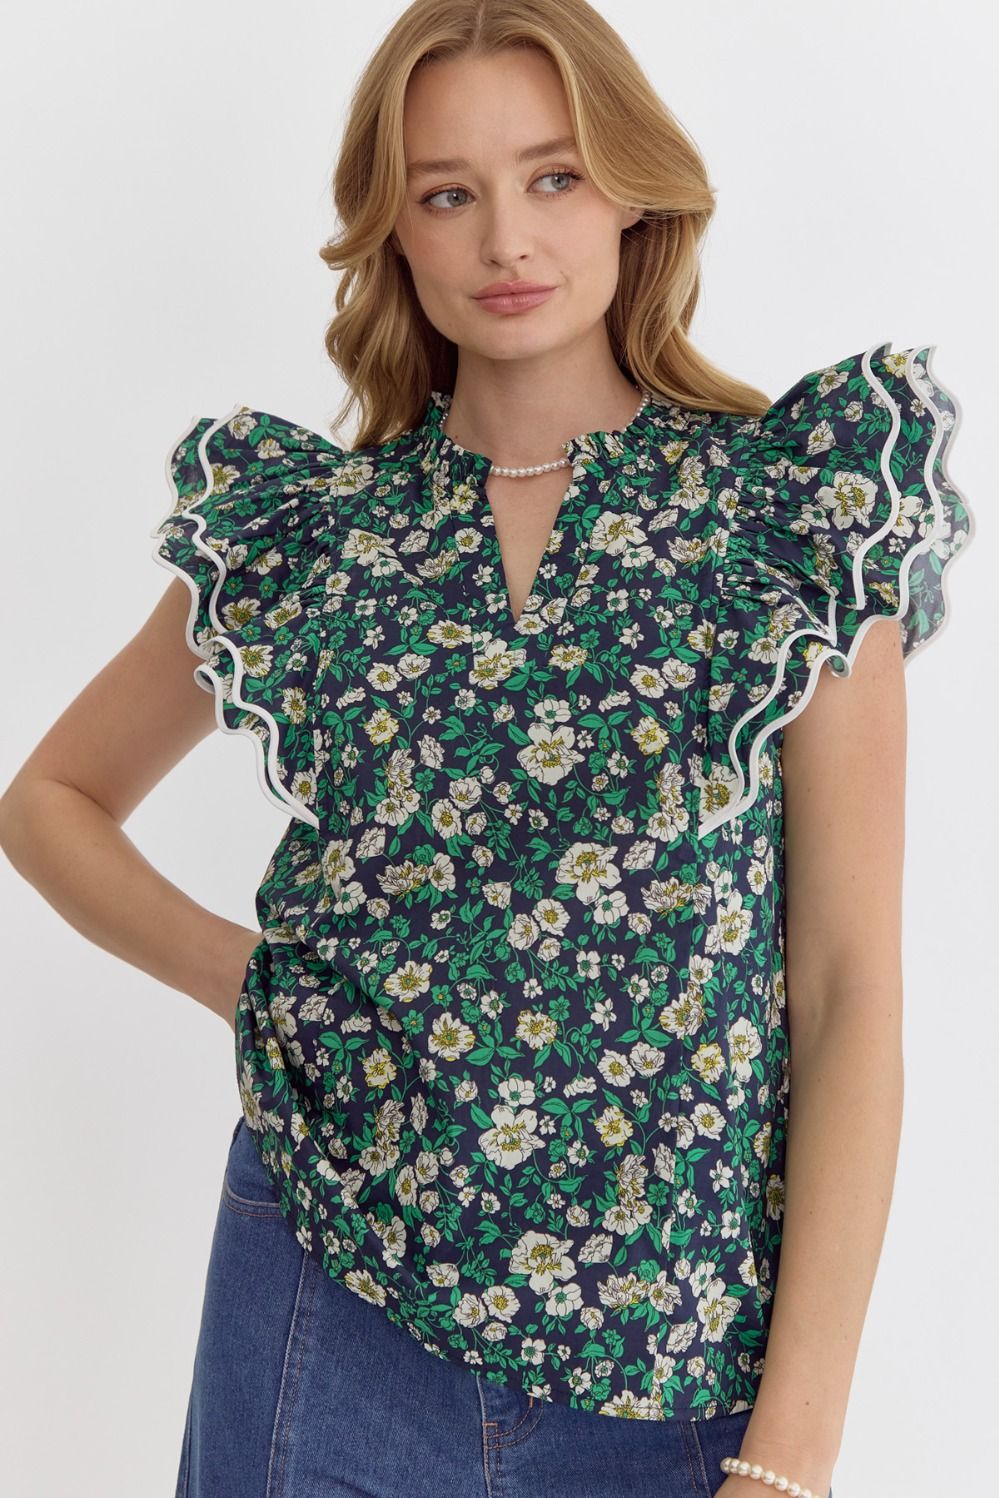 The Fiona Top